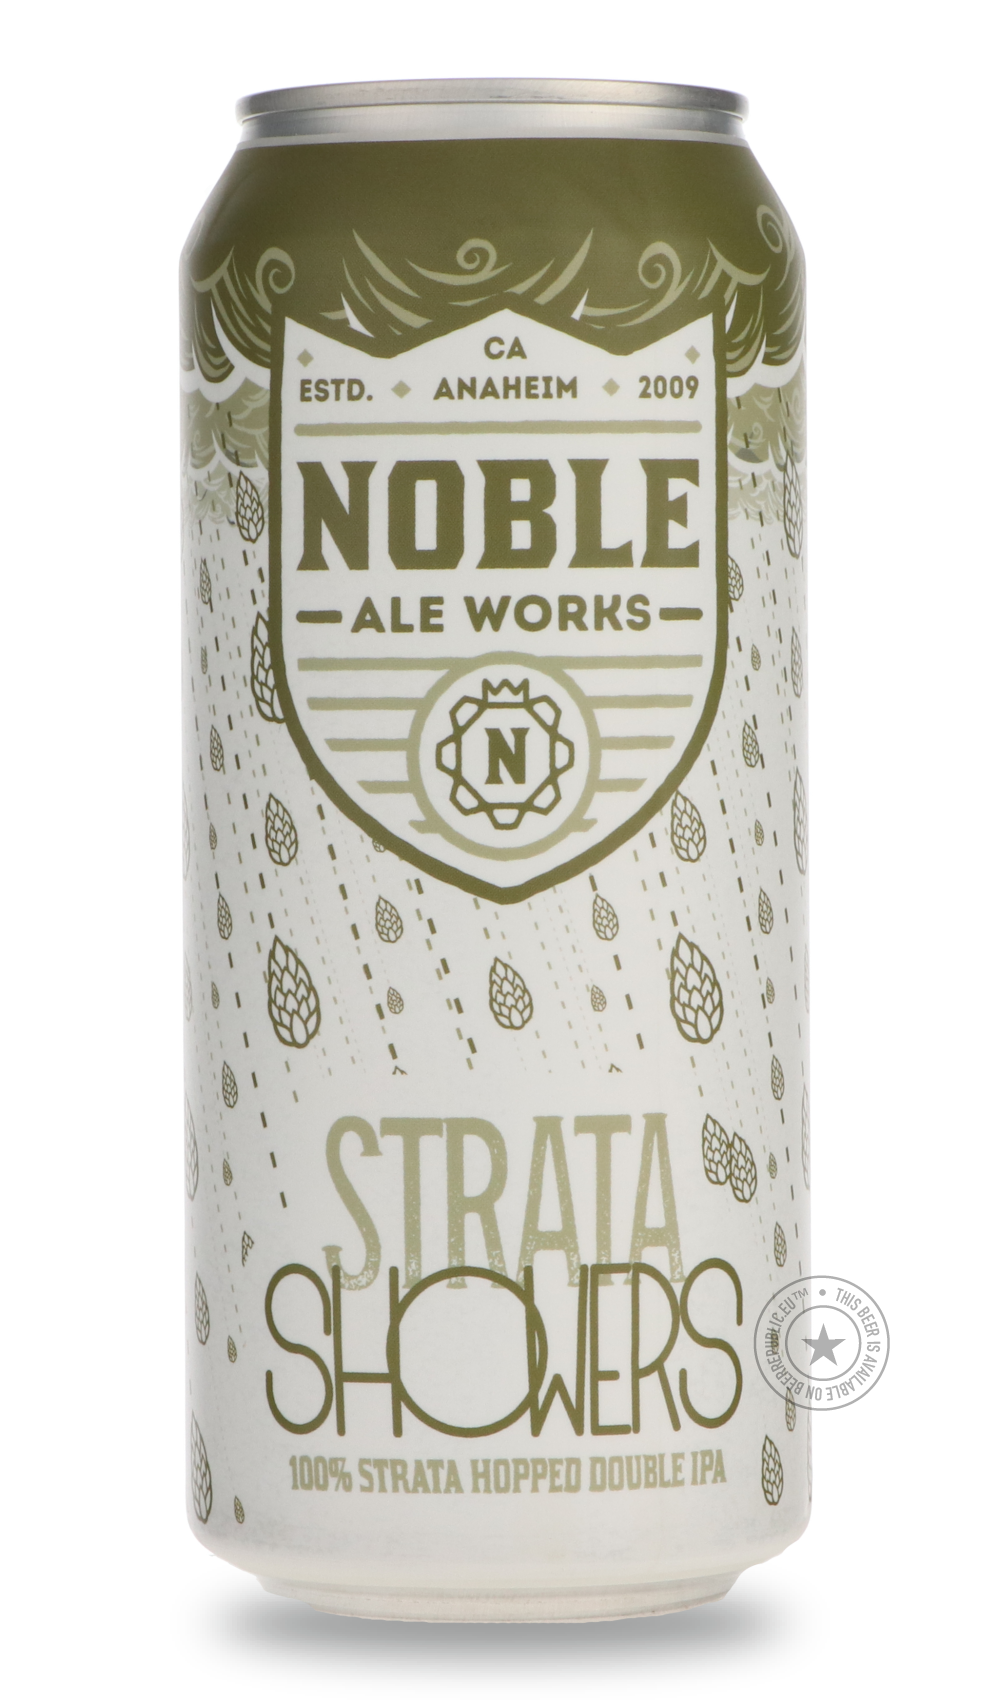 -Noble- Strata Showers-IPA- Only @ Beer Republic - The best online beer store for American & Canadian craft beer - Buy beer online from the USA and Canada - Bier online kopen - Amerikaans bier kopen - Craft beer store - Craft beer kopen - Amerikanisch bier kaufen - Bier online kaufen - Acheter biere online - IPA - Stout - Porter - New England IPA - Hazy IPA - Imperial Stout - Barrel Aged - Barrel Aged Imperial Stout - Brown - Dark beer - Blond - Blonde - Pilsner - Lager - Wheat - Weizen - Amber - Barley Win